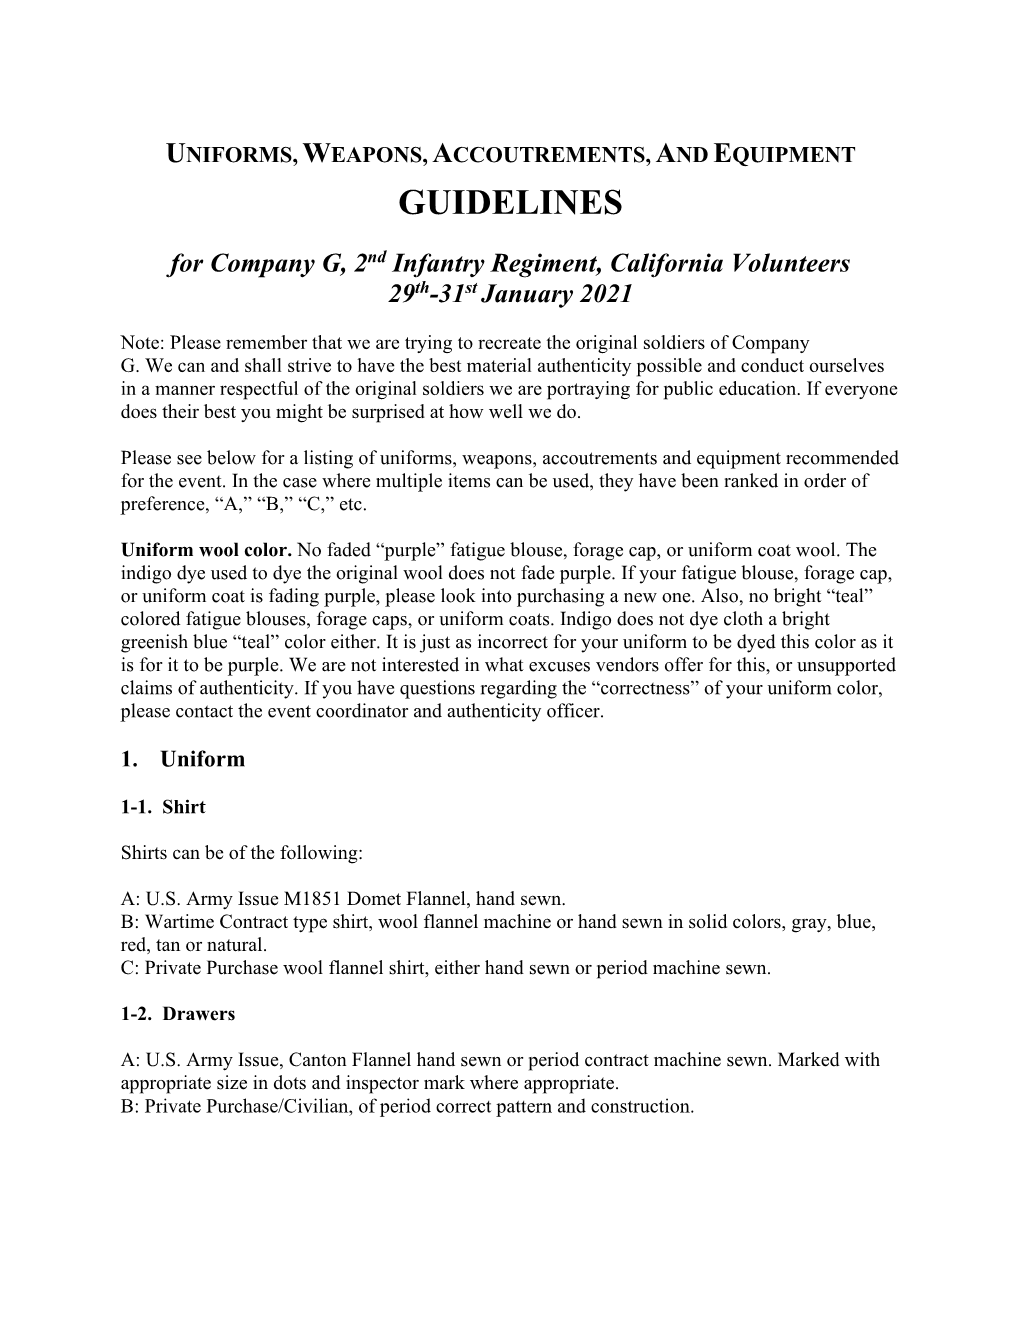 Uniform and Equipment Guidelines